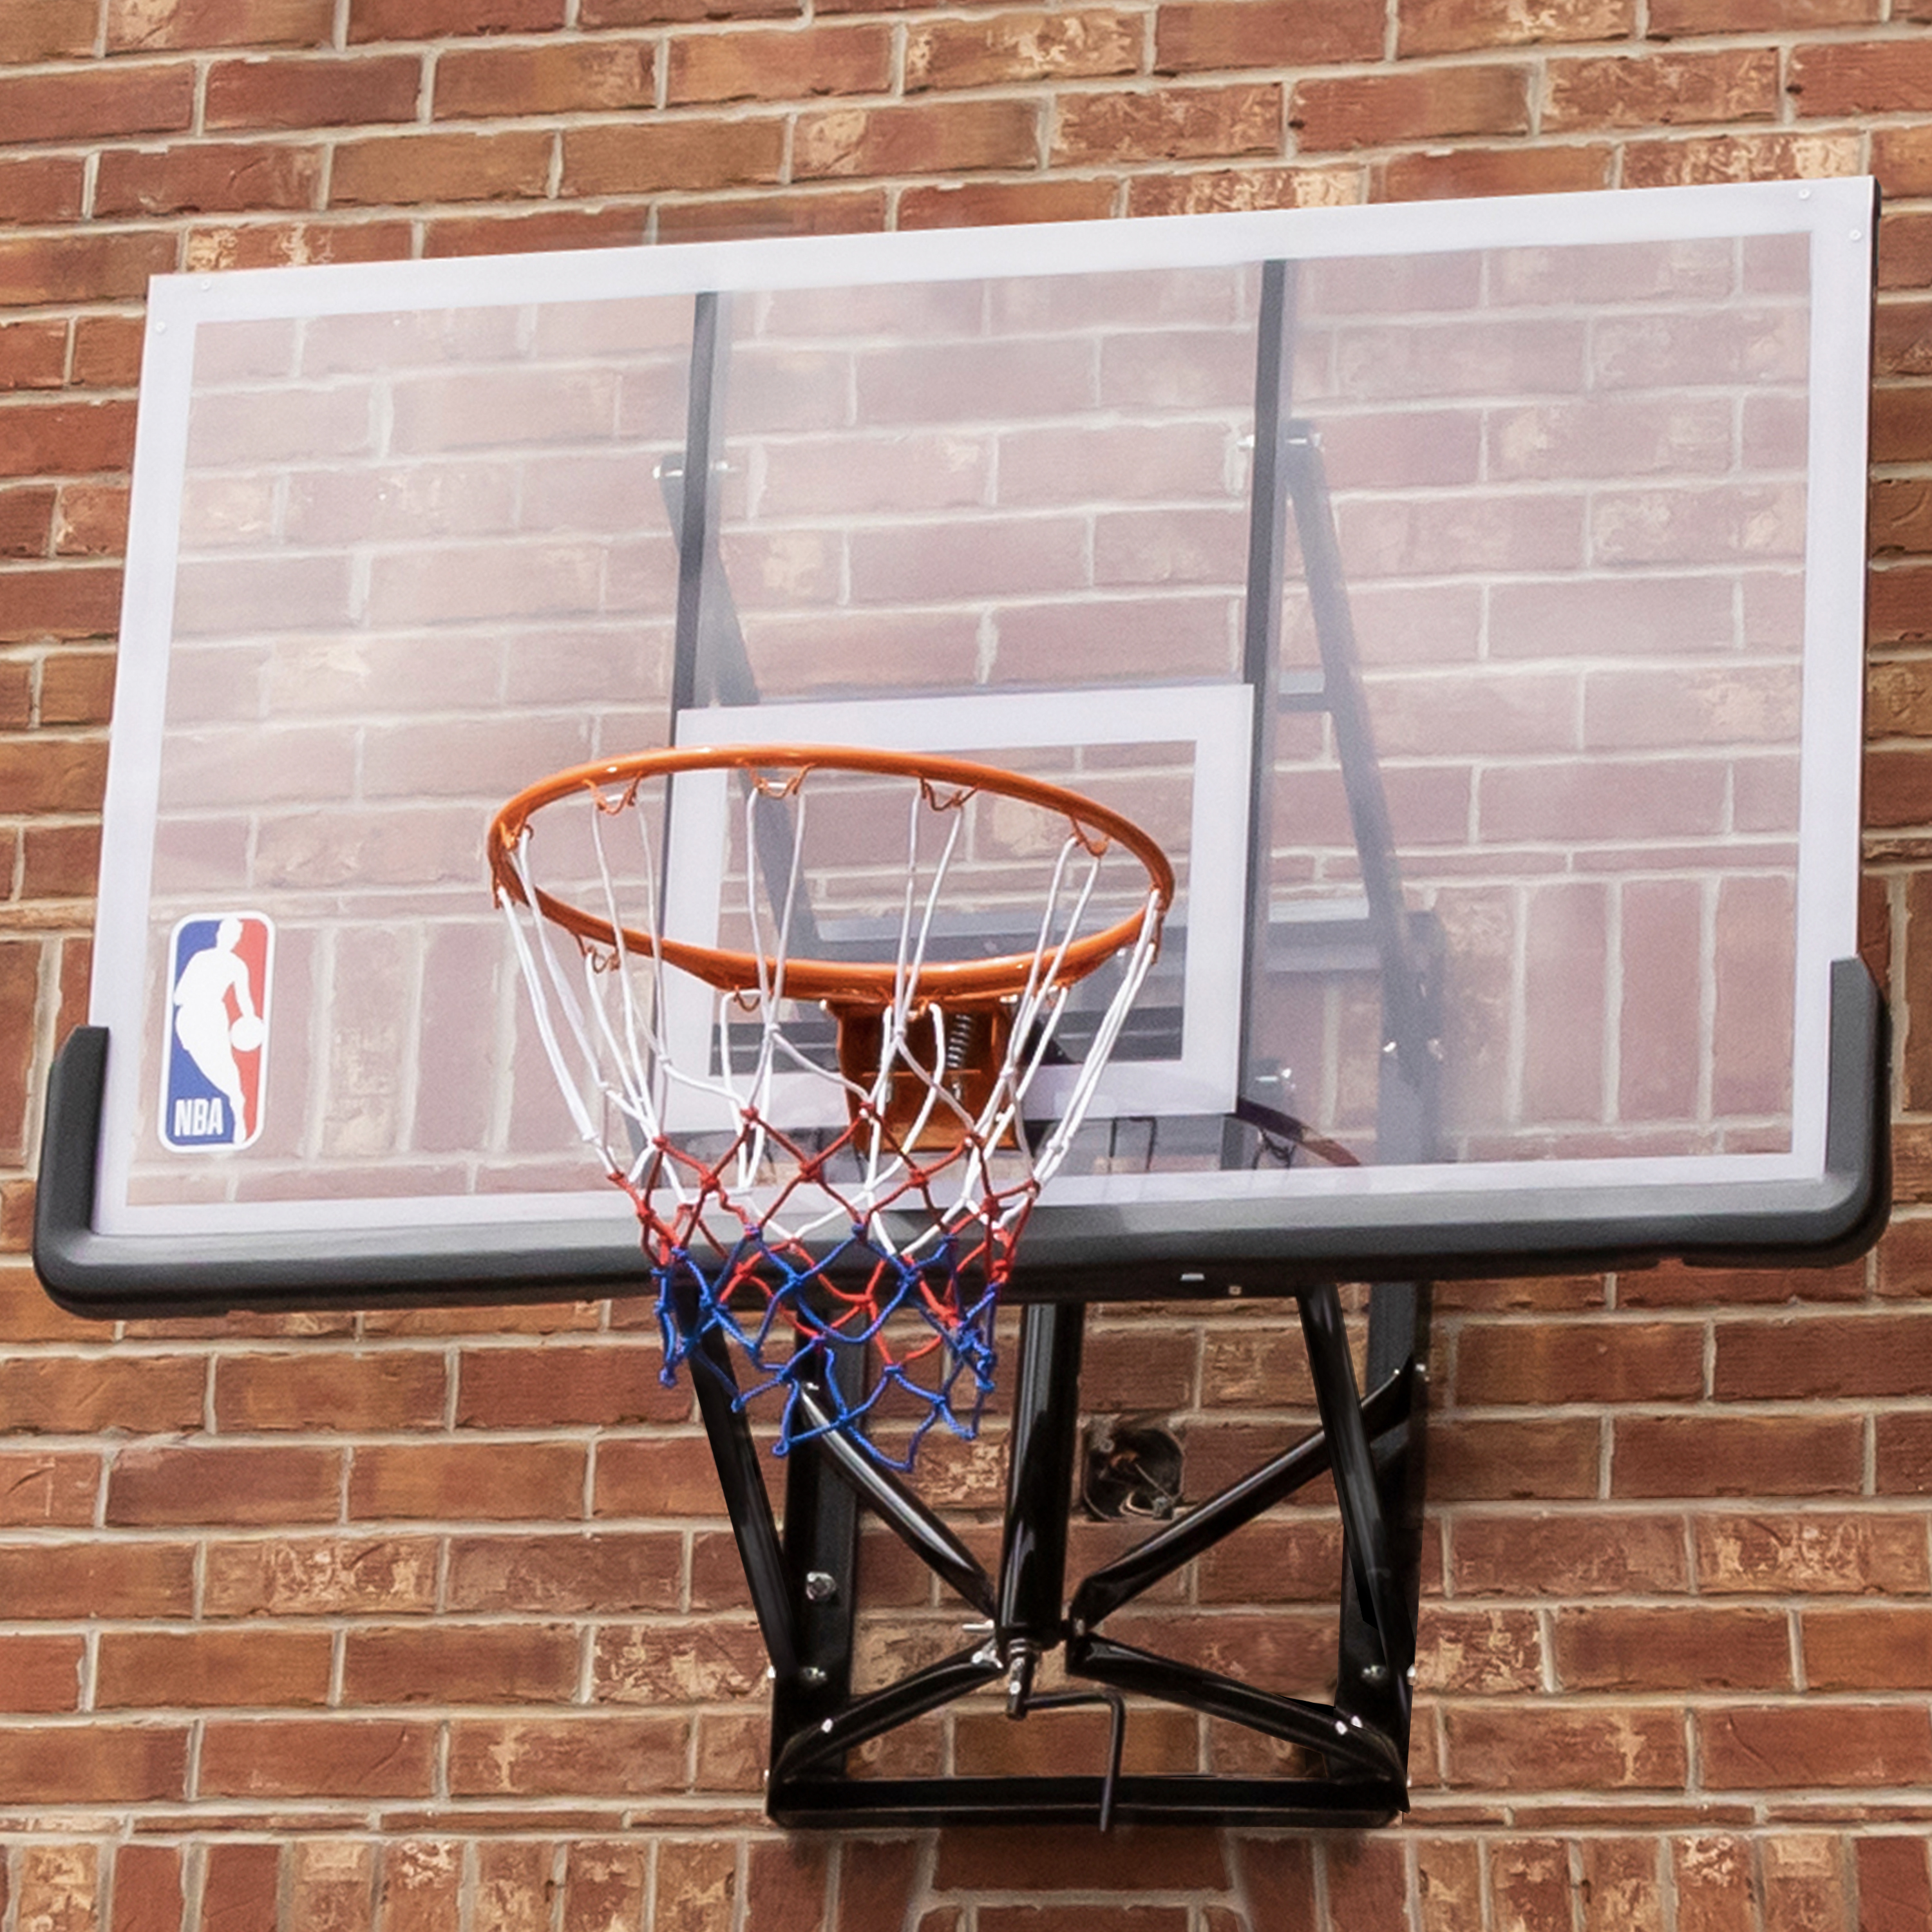 NBA Official 54 In. Wall-Mounted Basketball Hoop with Polycarbonate Backboard - image 3 of 9